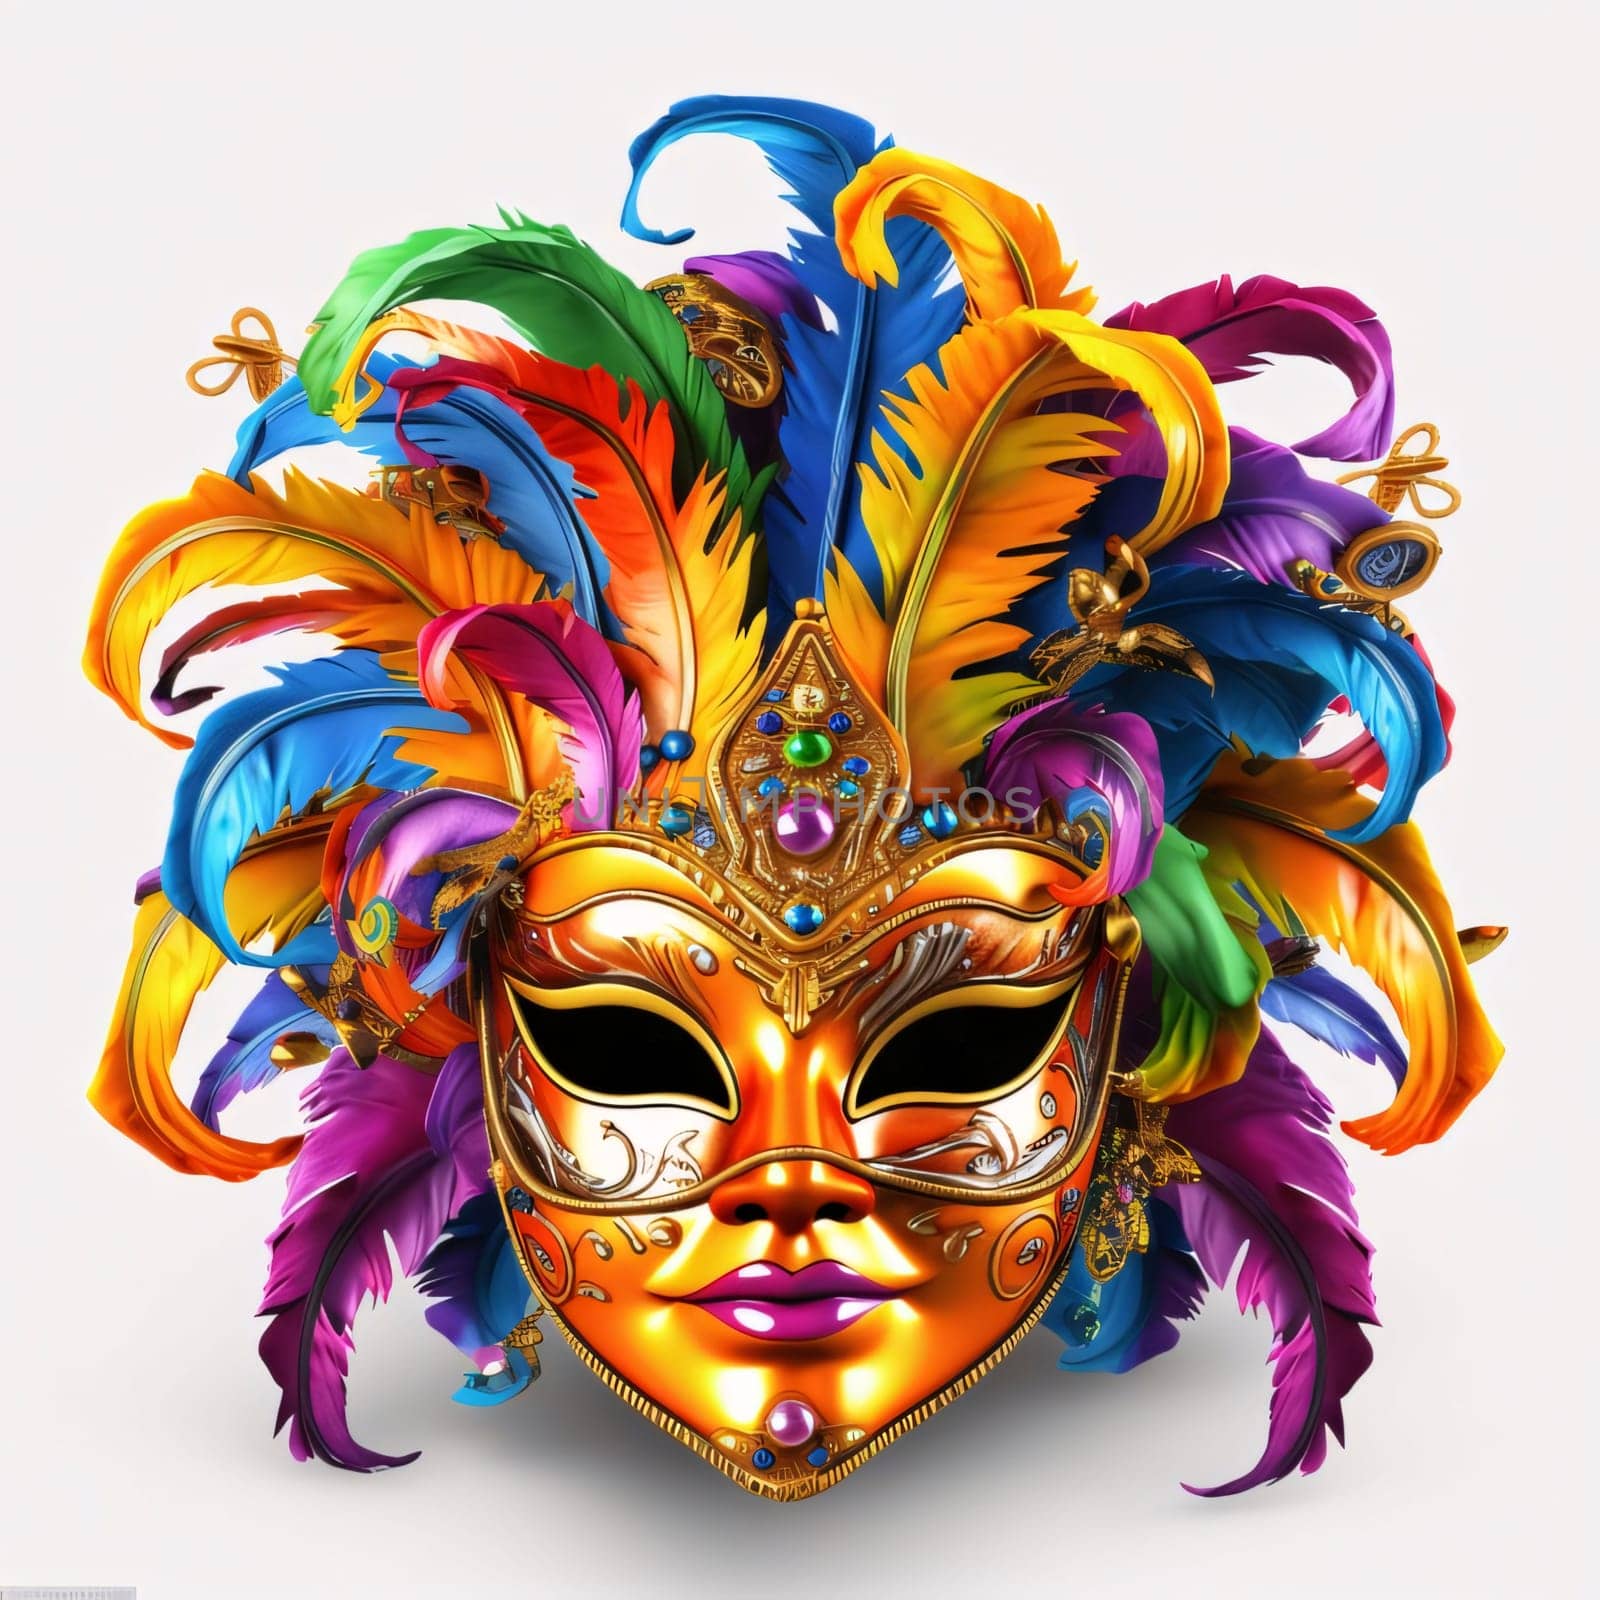 Gold carnival mask with colorful rainbow decorations, feathers on white isolated background. Carnival outfits, masks and decorations. A time of fun and celebration before the fast.